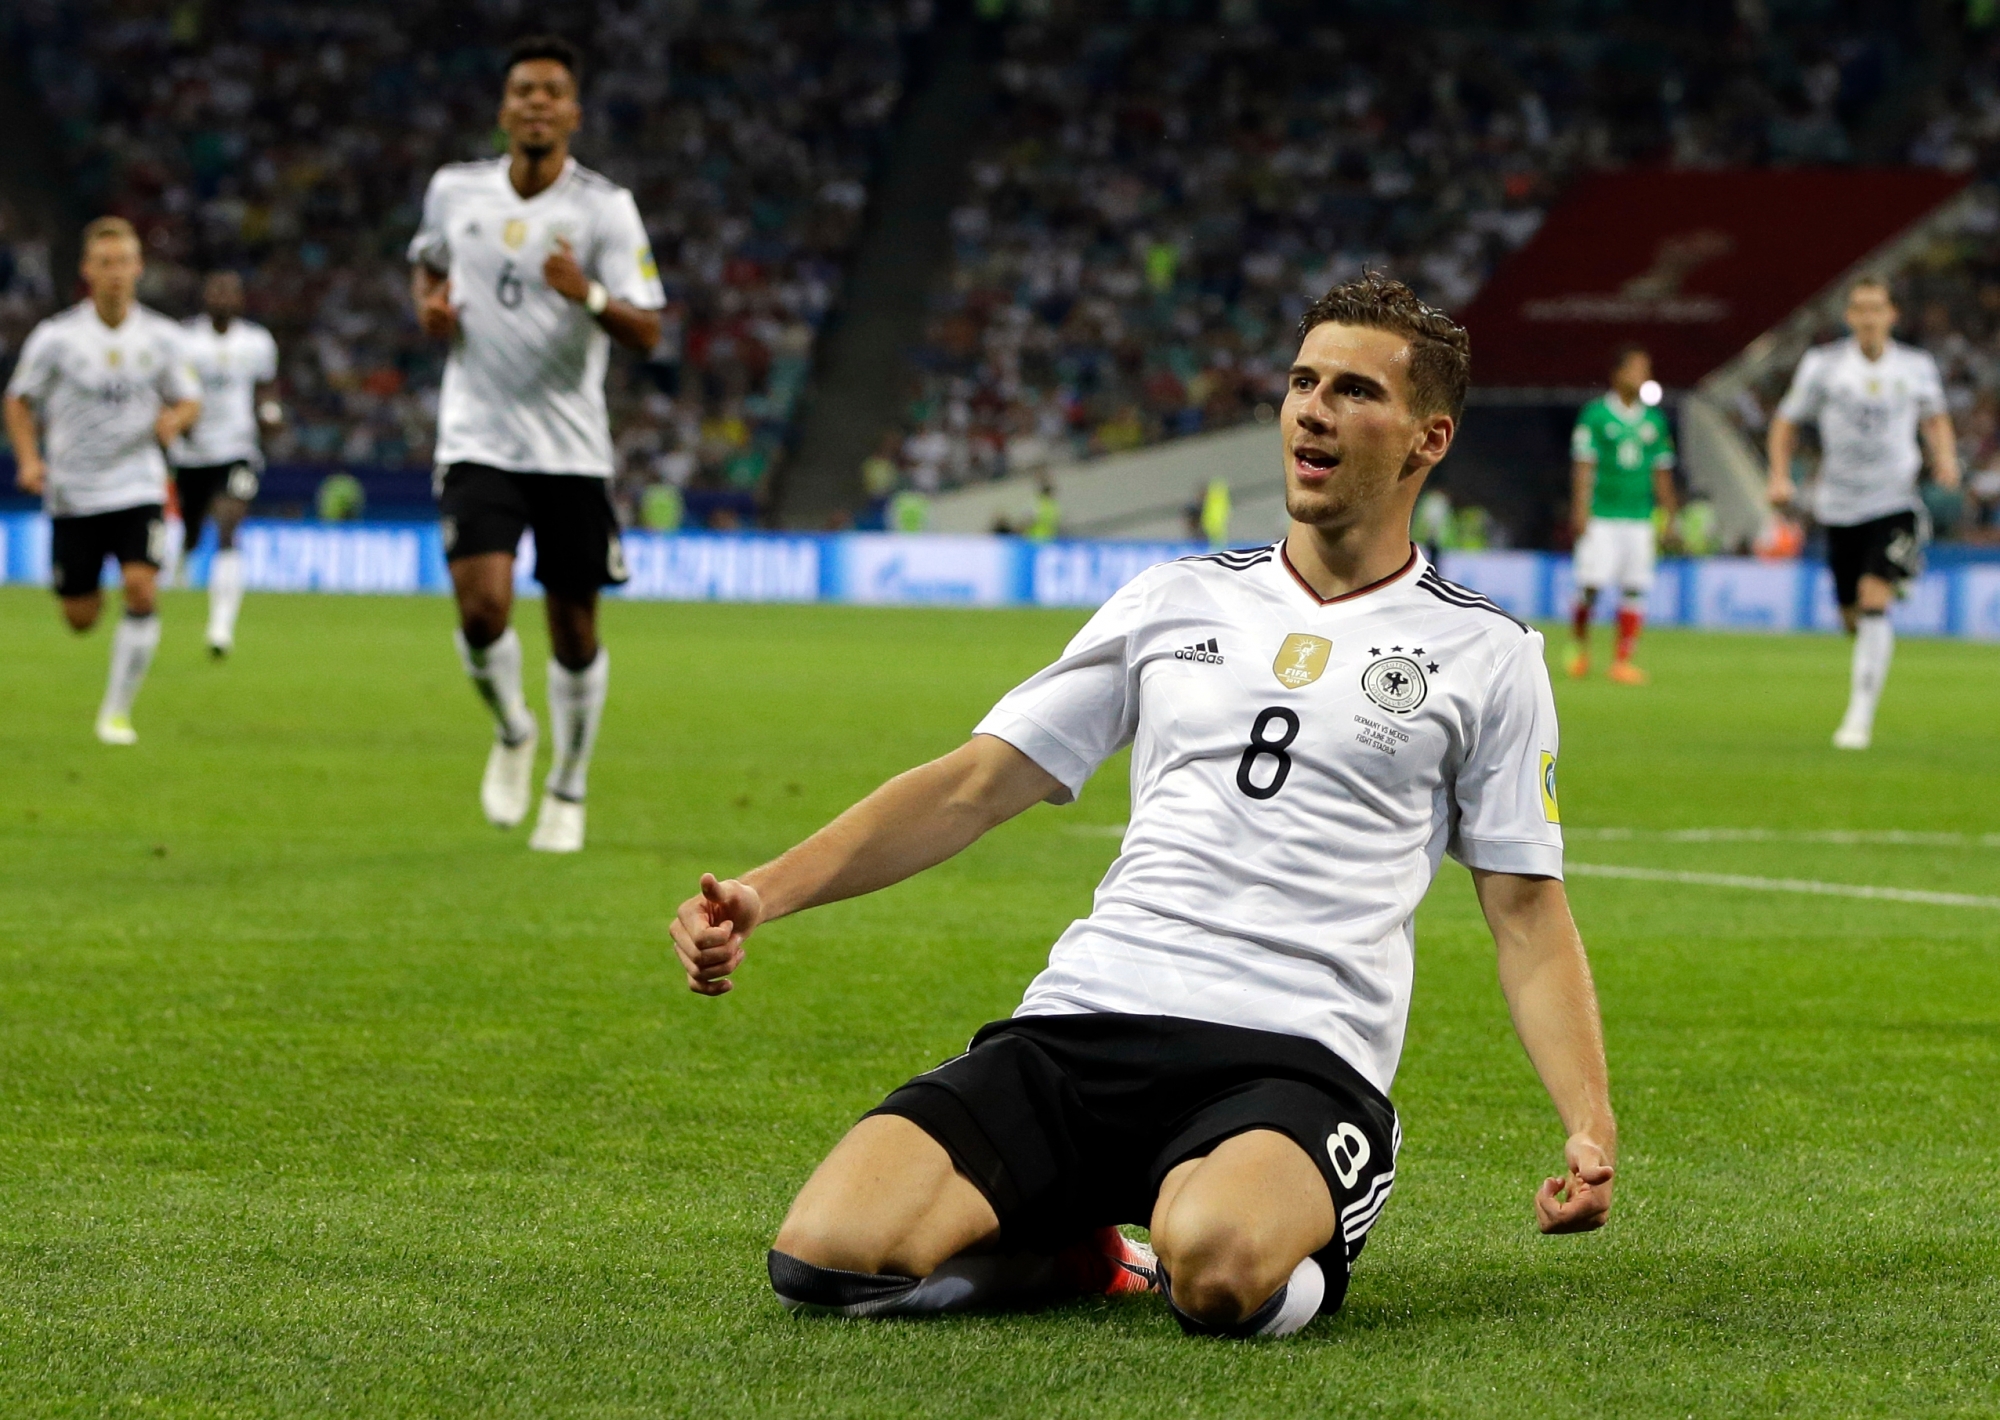 Germany's Leon Goretzka celebrates after scoring the opening goal during the Confederations Cup, semifinal soccer match between Germany and Mexico, at the Fisht Stadium in Sochi, Russia, Thursday, June 29, 2017. (AP Photo/Thanassis Stavrakis) Soccer Confed Cup Germany Mexico